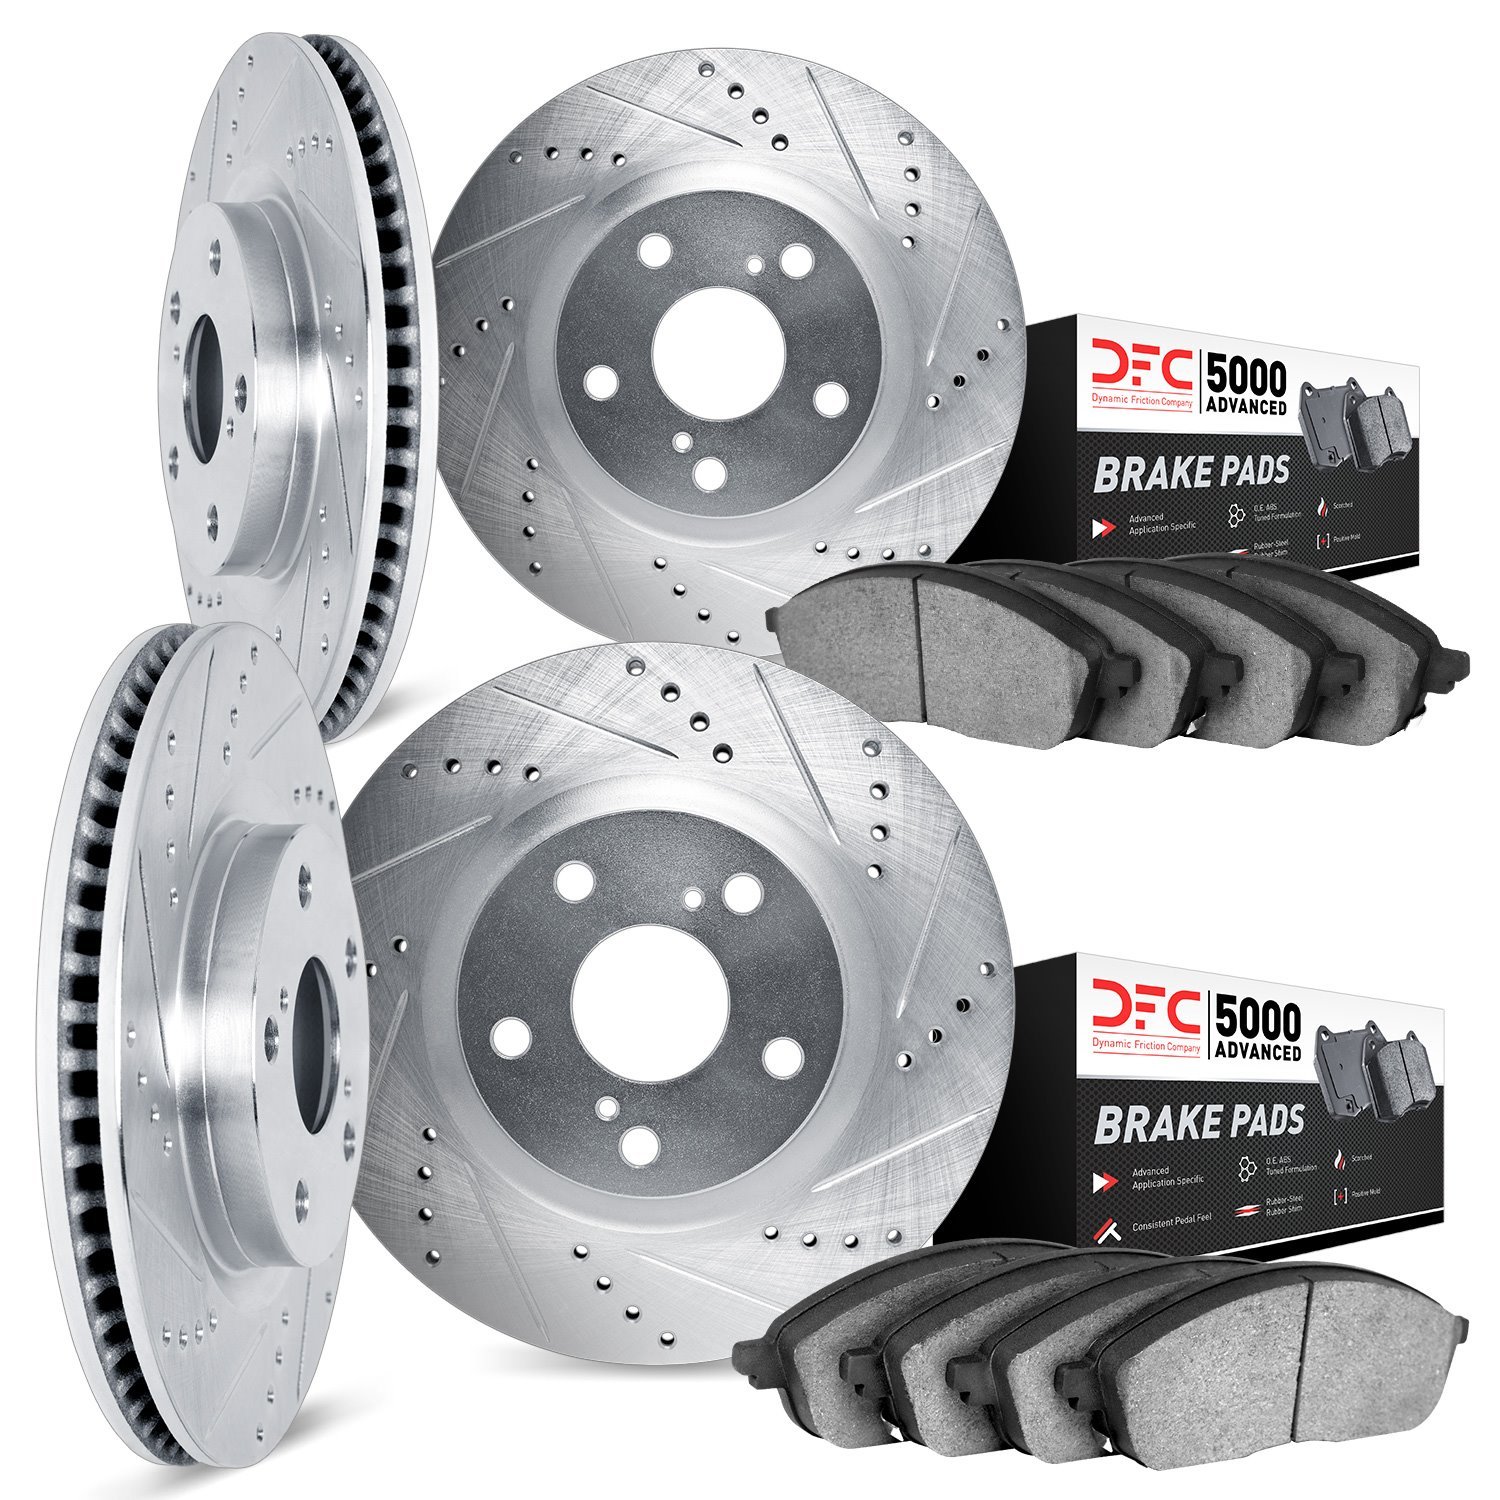 7504-02013 Drilled/Slotted Brake Rotors w/5000 Advanced Brake Pads Kit [Silver], 1987-1989 Porsche, Position: Front and Rear